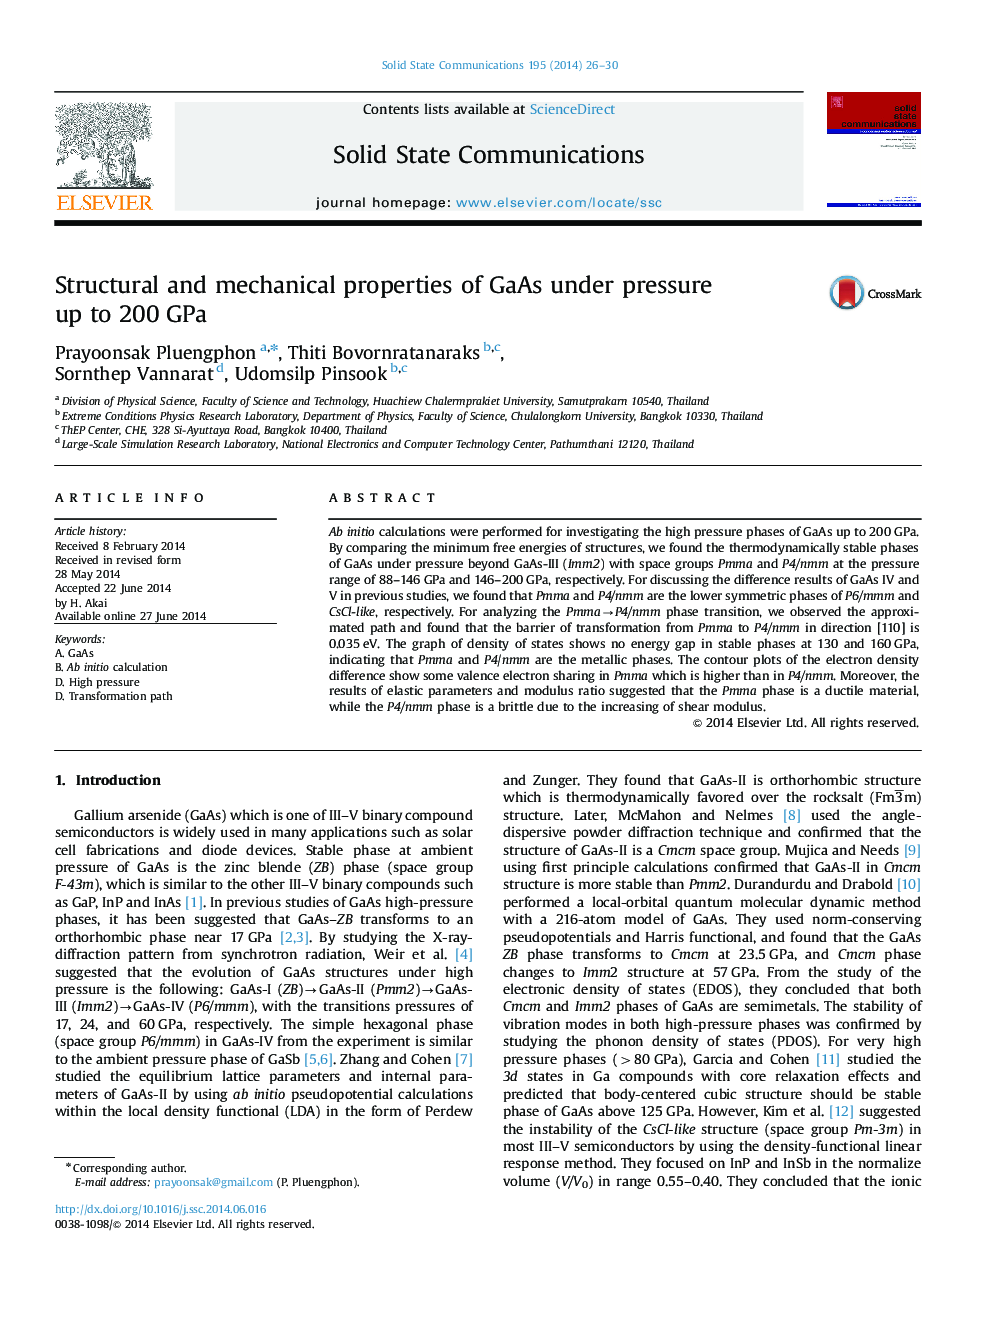 Structural and mechanical properties of GaAs under pressure up to 200 GPa